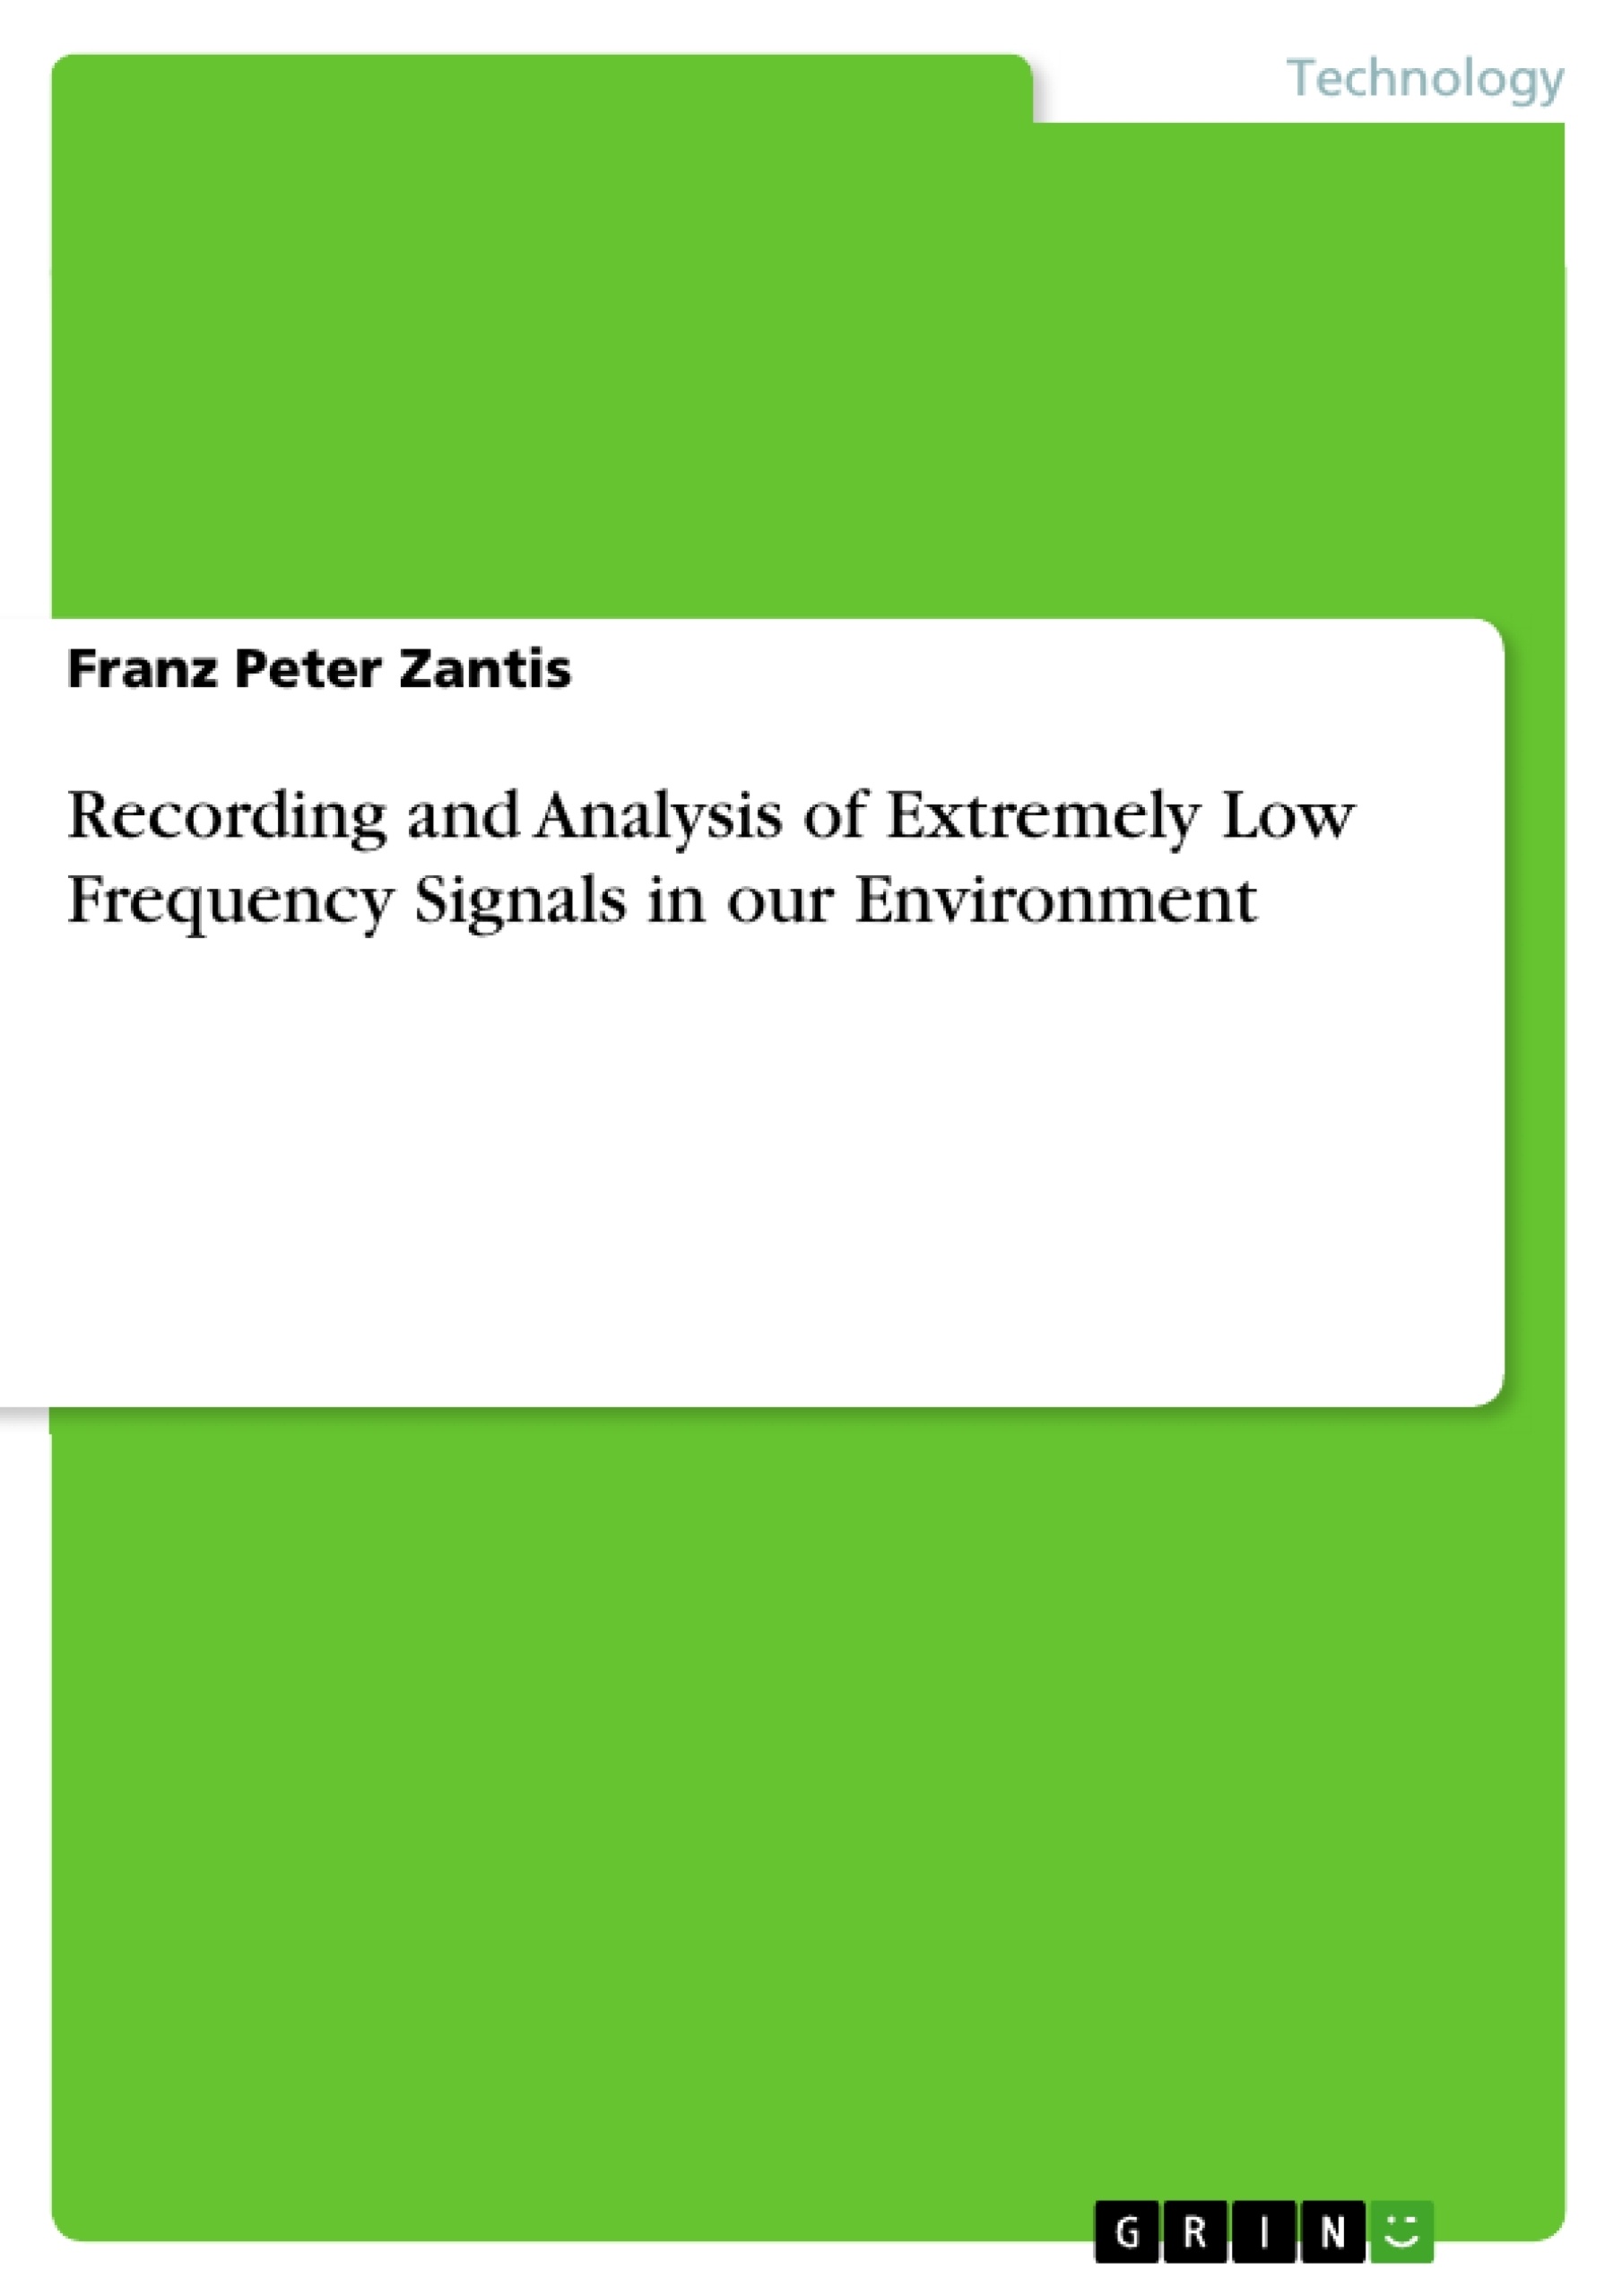 Title: Recording and Analysis of Extremely Low Frequency Signals in our Environment